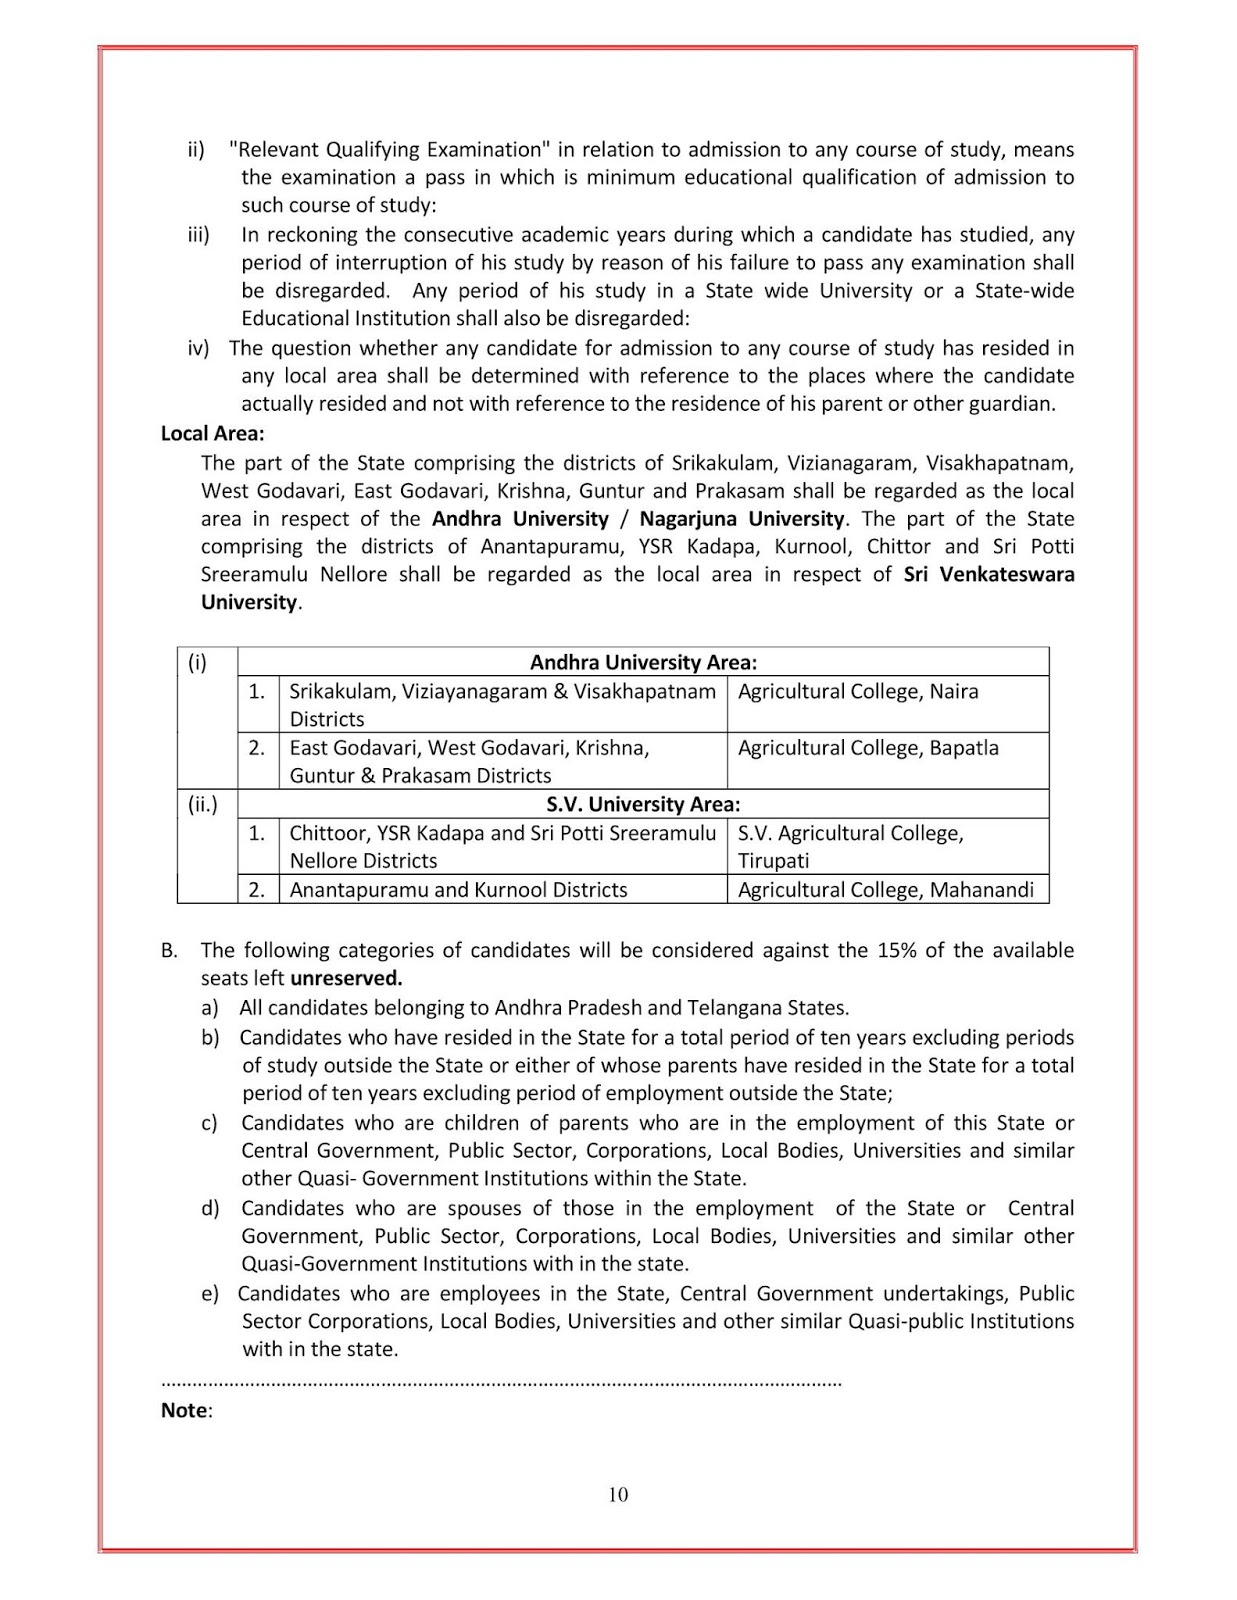 ANGRAU PG PhD Admission 2019 Notification Released,Online Application Form